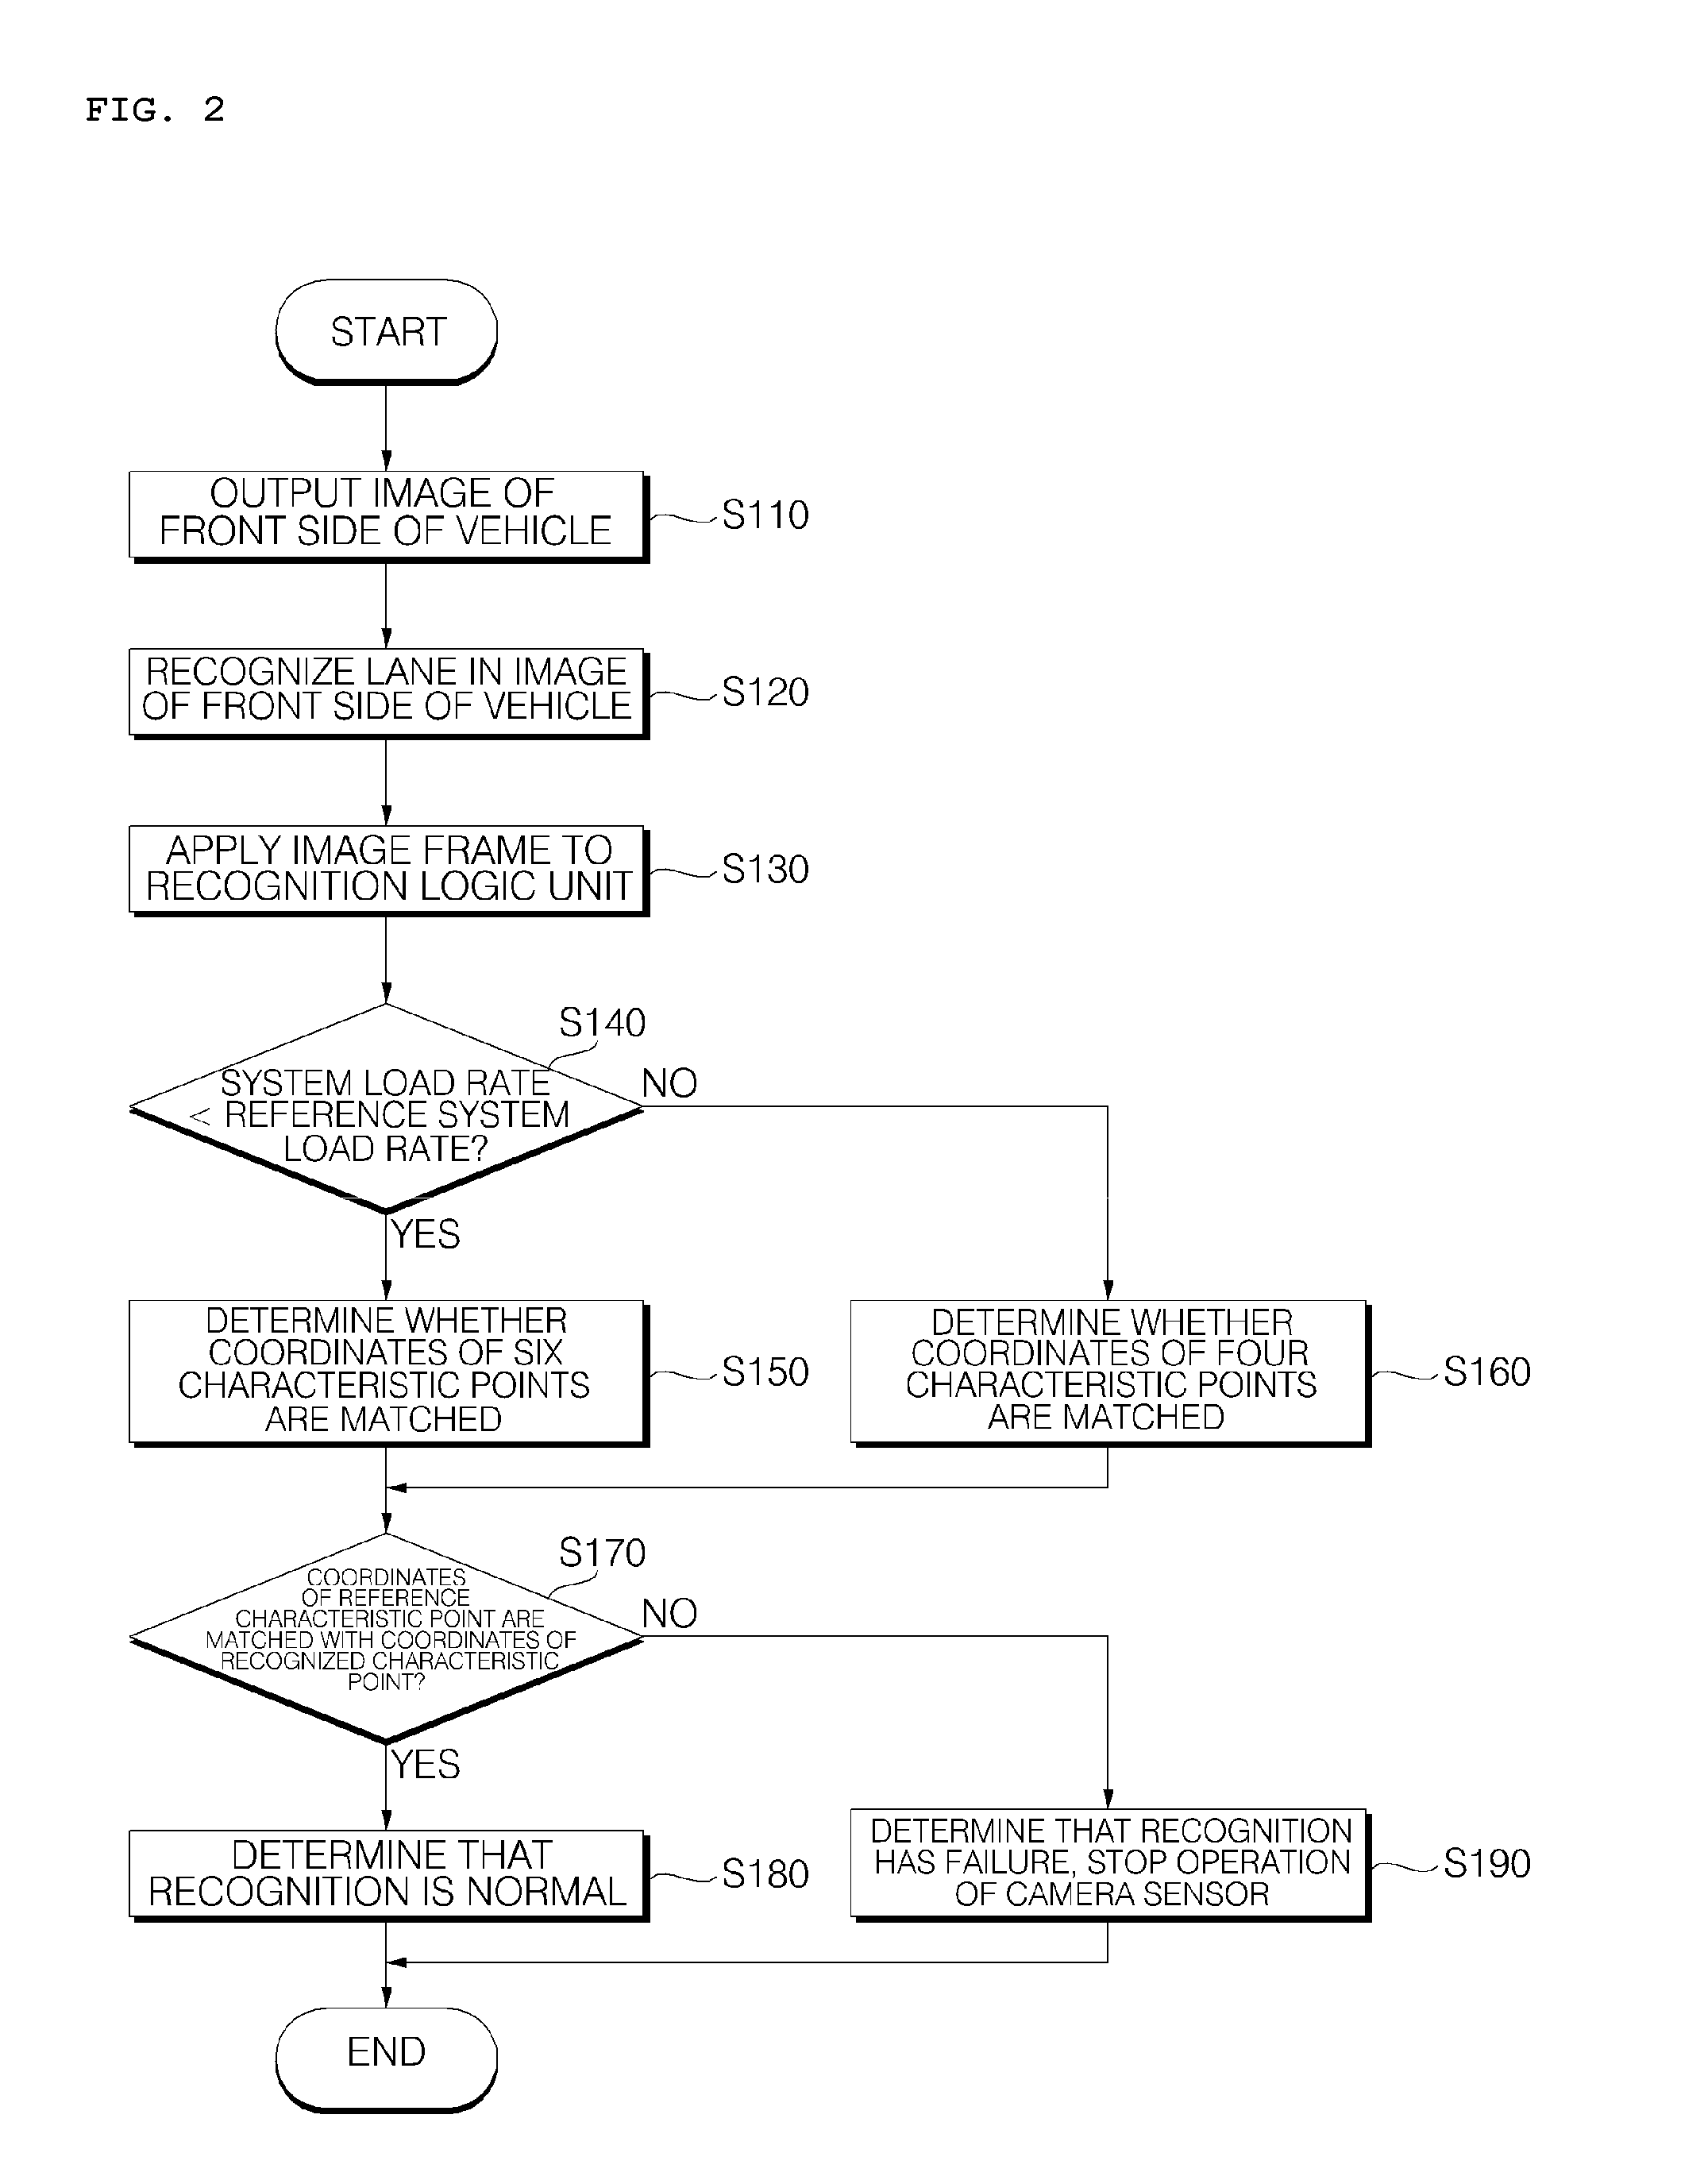 Apparatus and method of diagnosing recognition failure